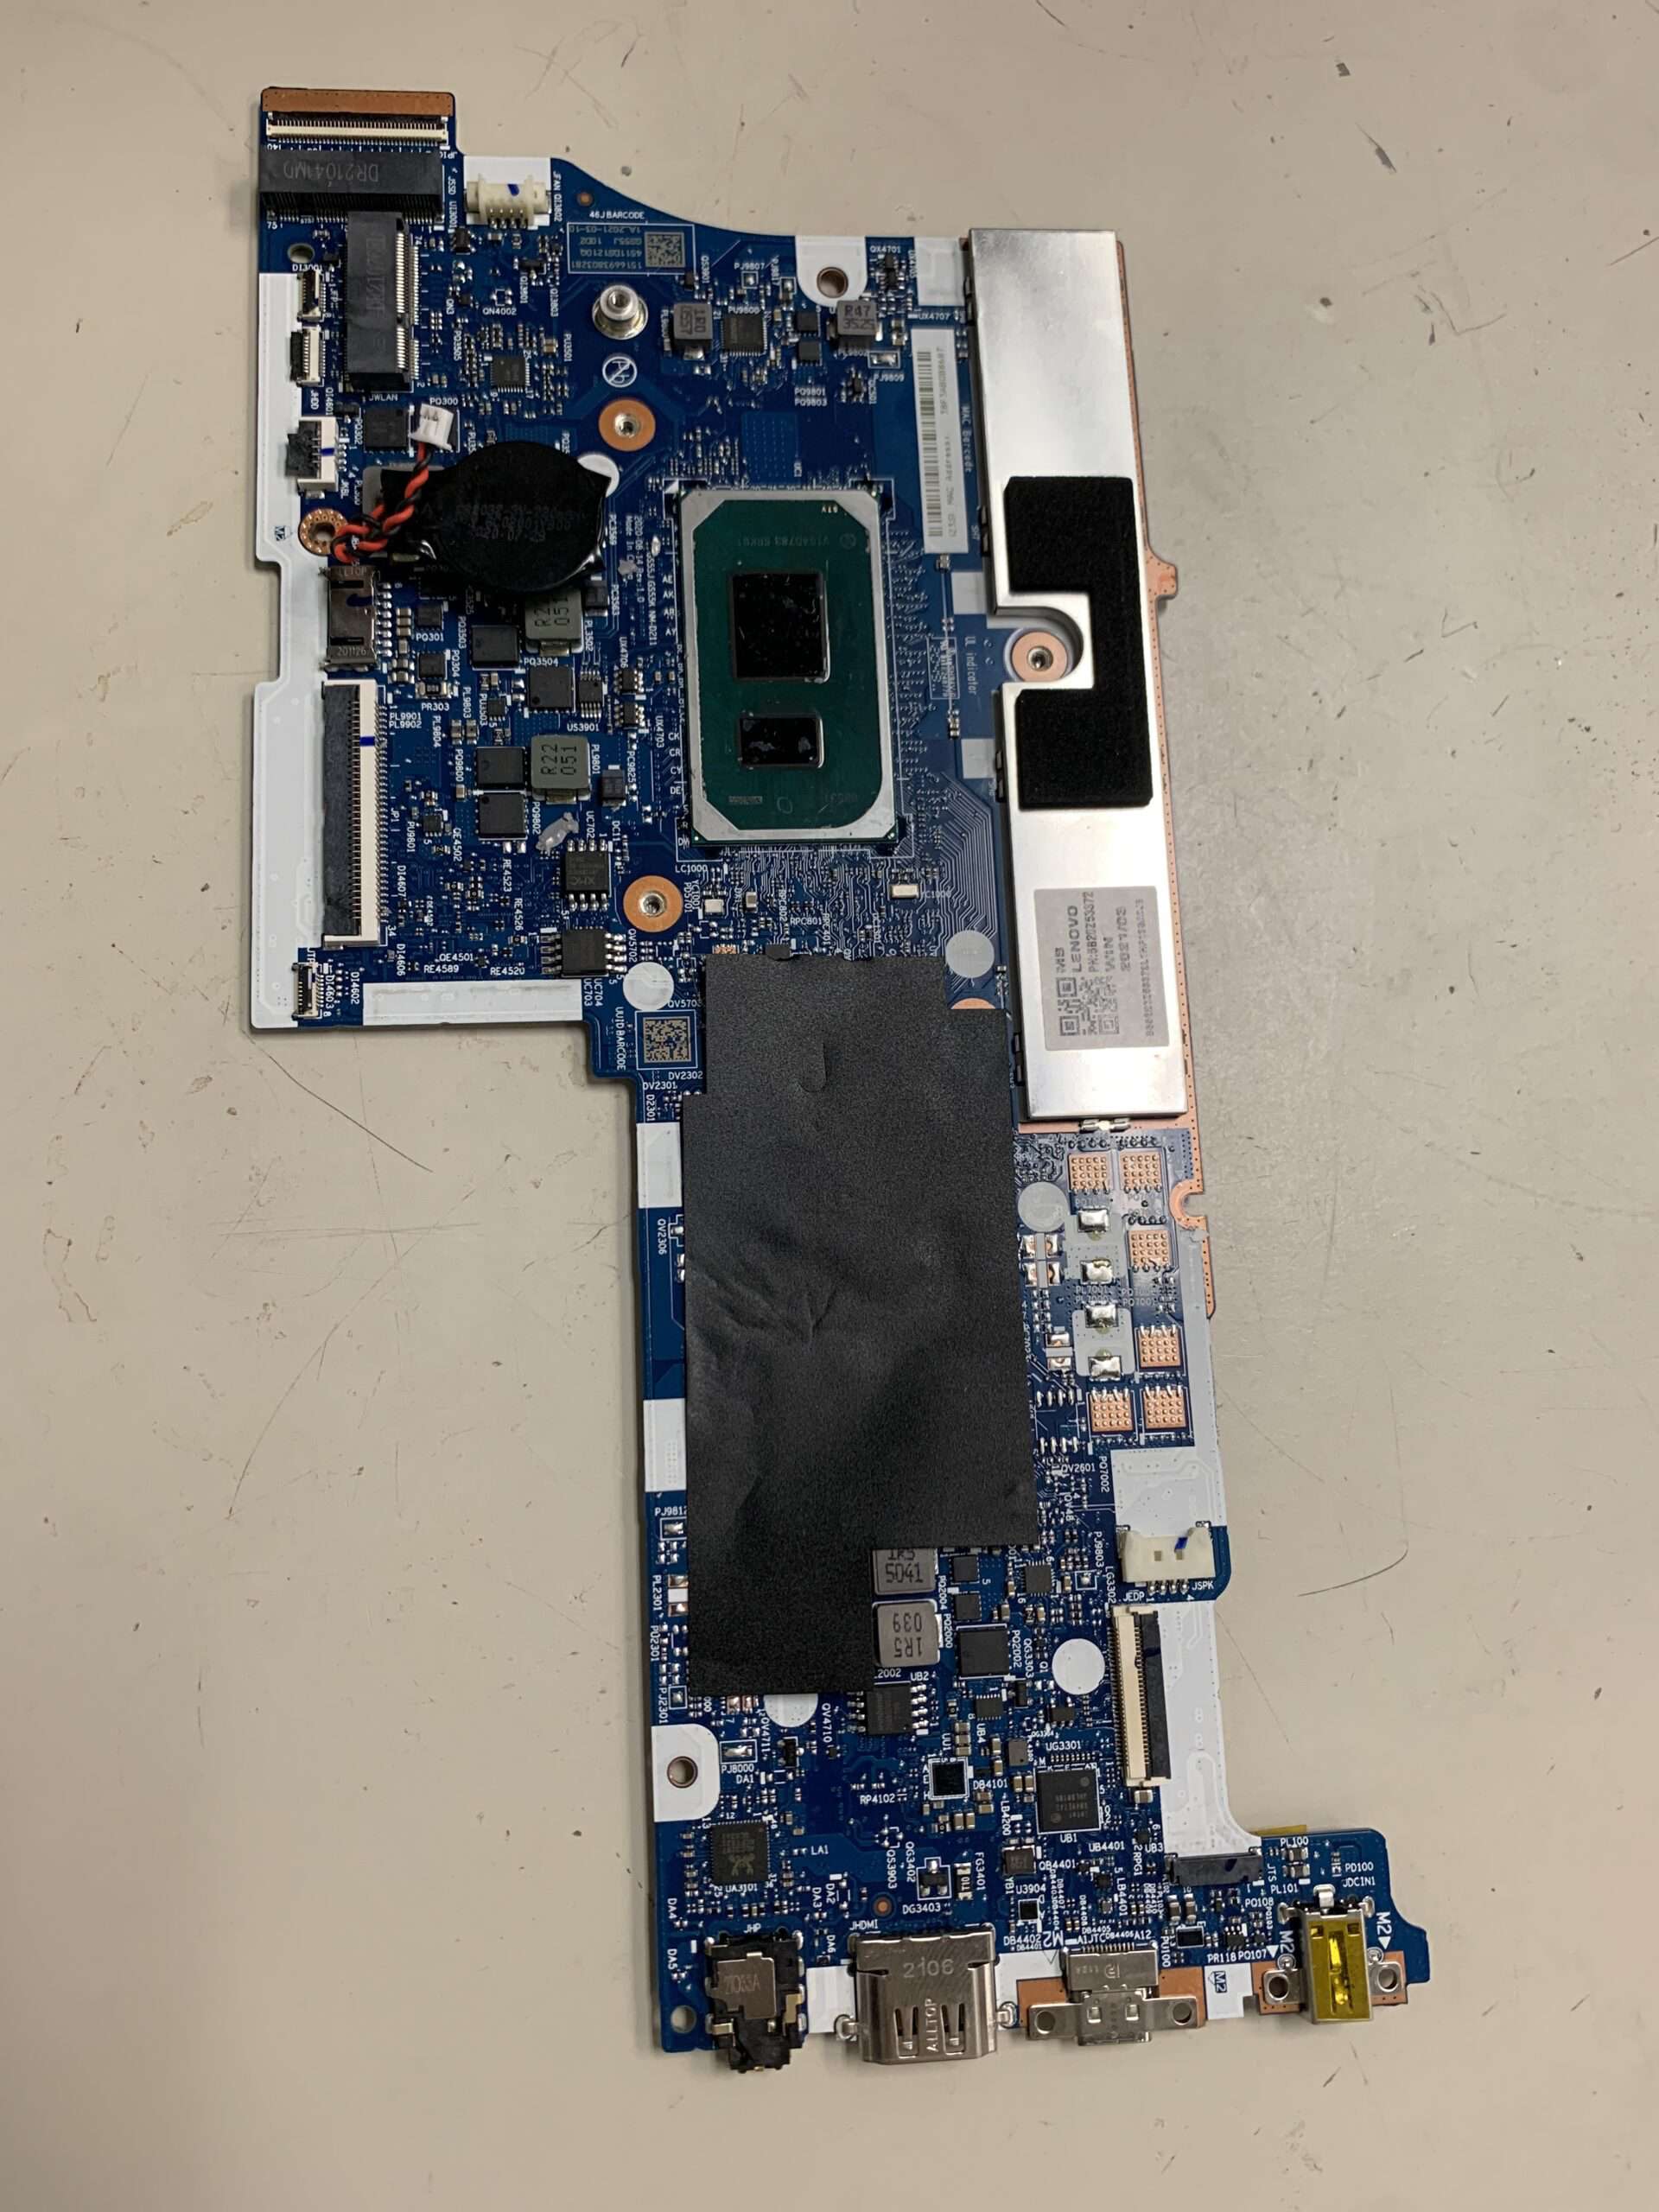 What does a laptop motherboard look like?